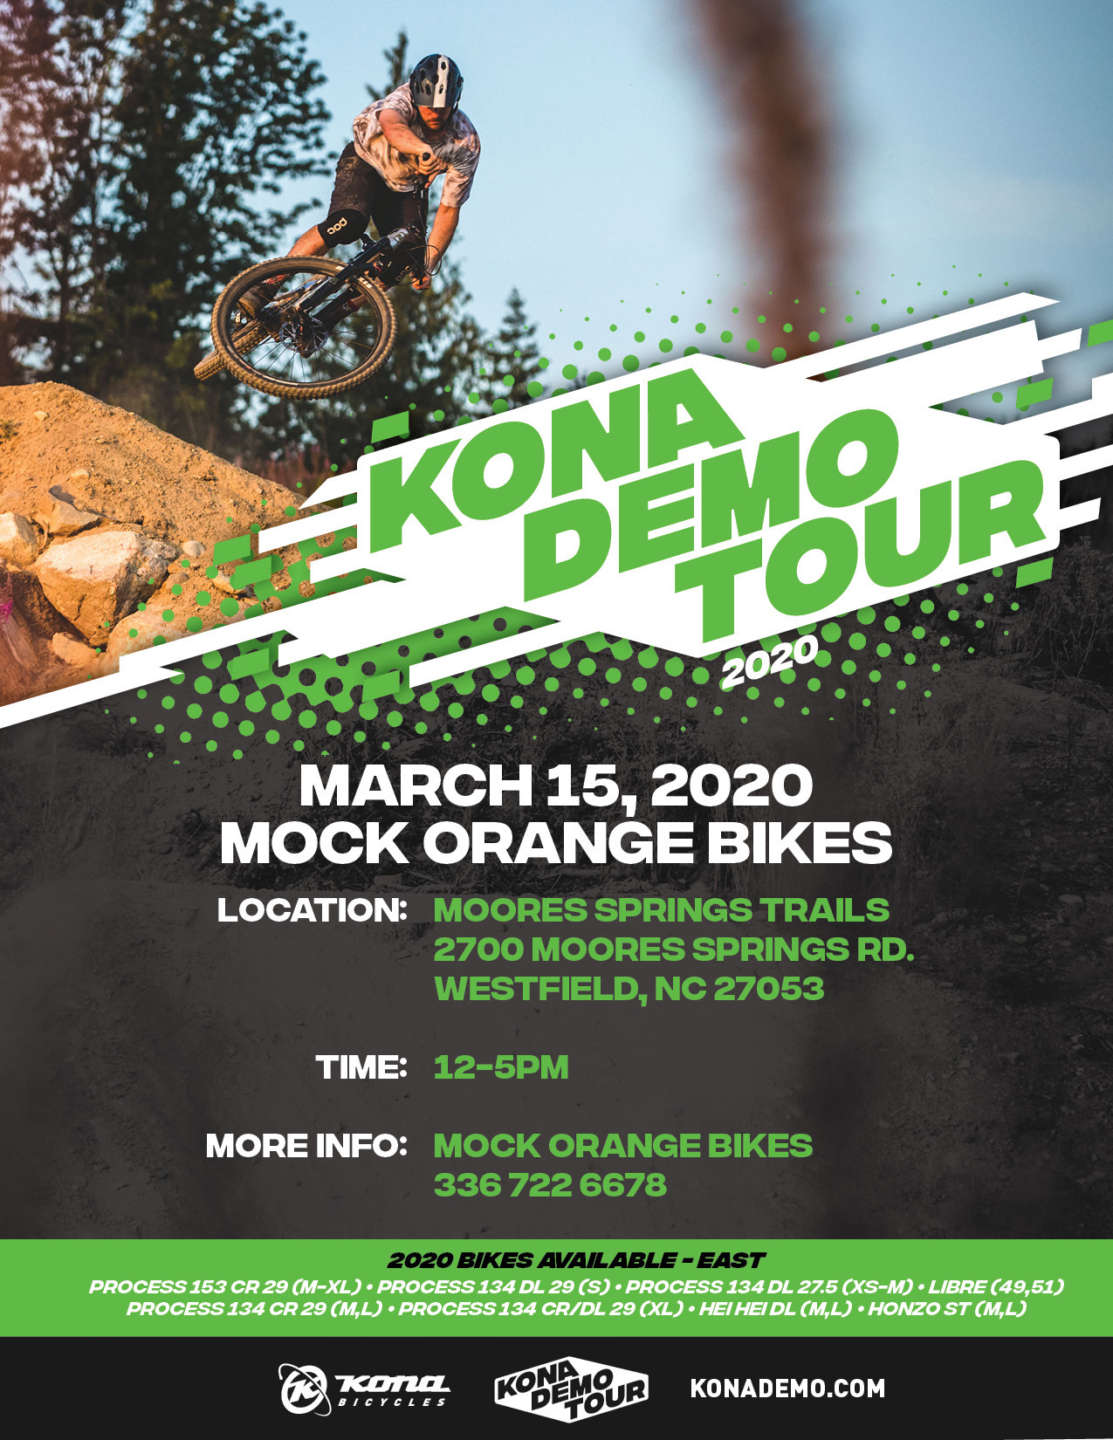 Be sure and put the Kona Demo on your calendar! March 15th!